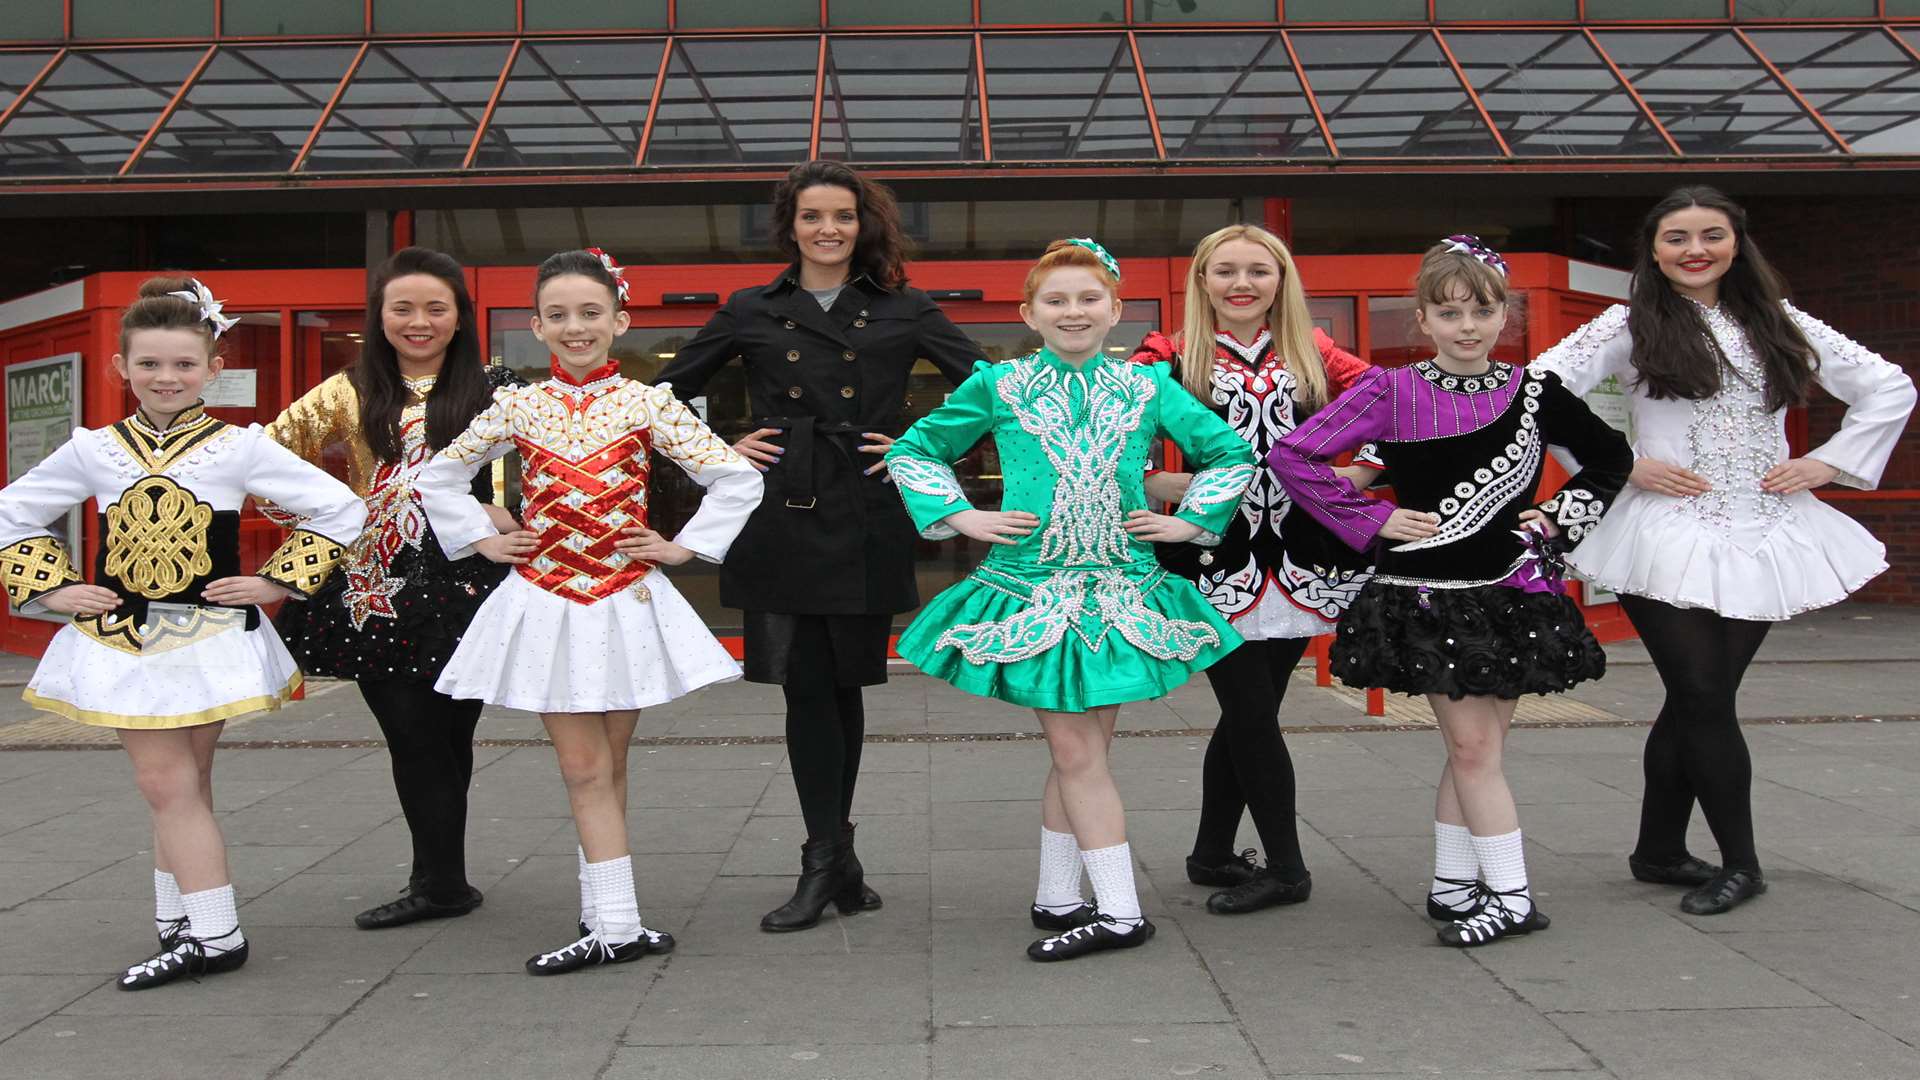 Edele Lynch will perform at the Orchard Theatre, with the Linda Fryday Academy of Irish Dance